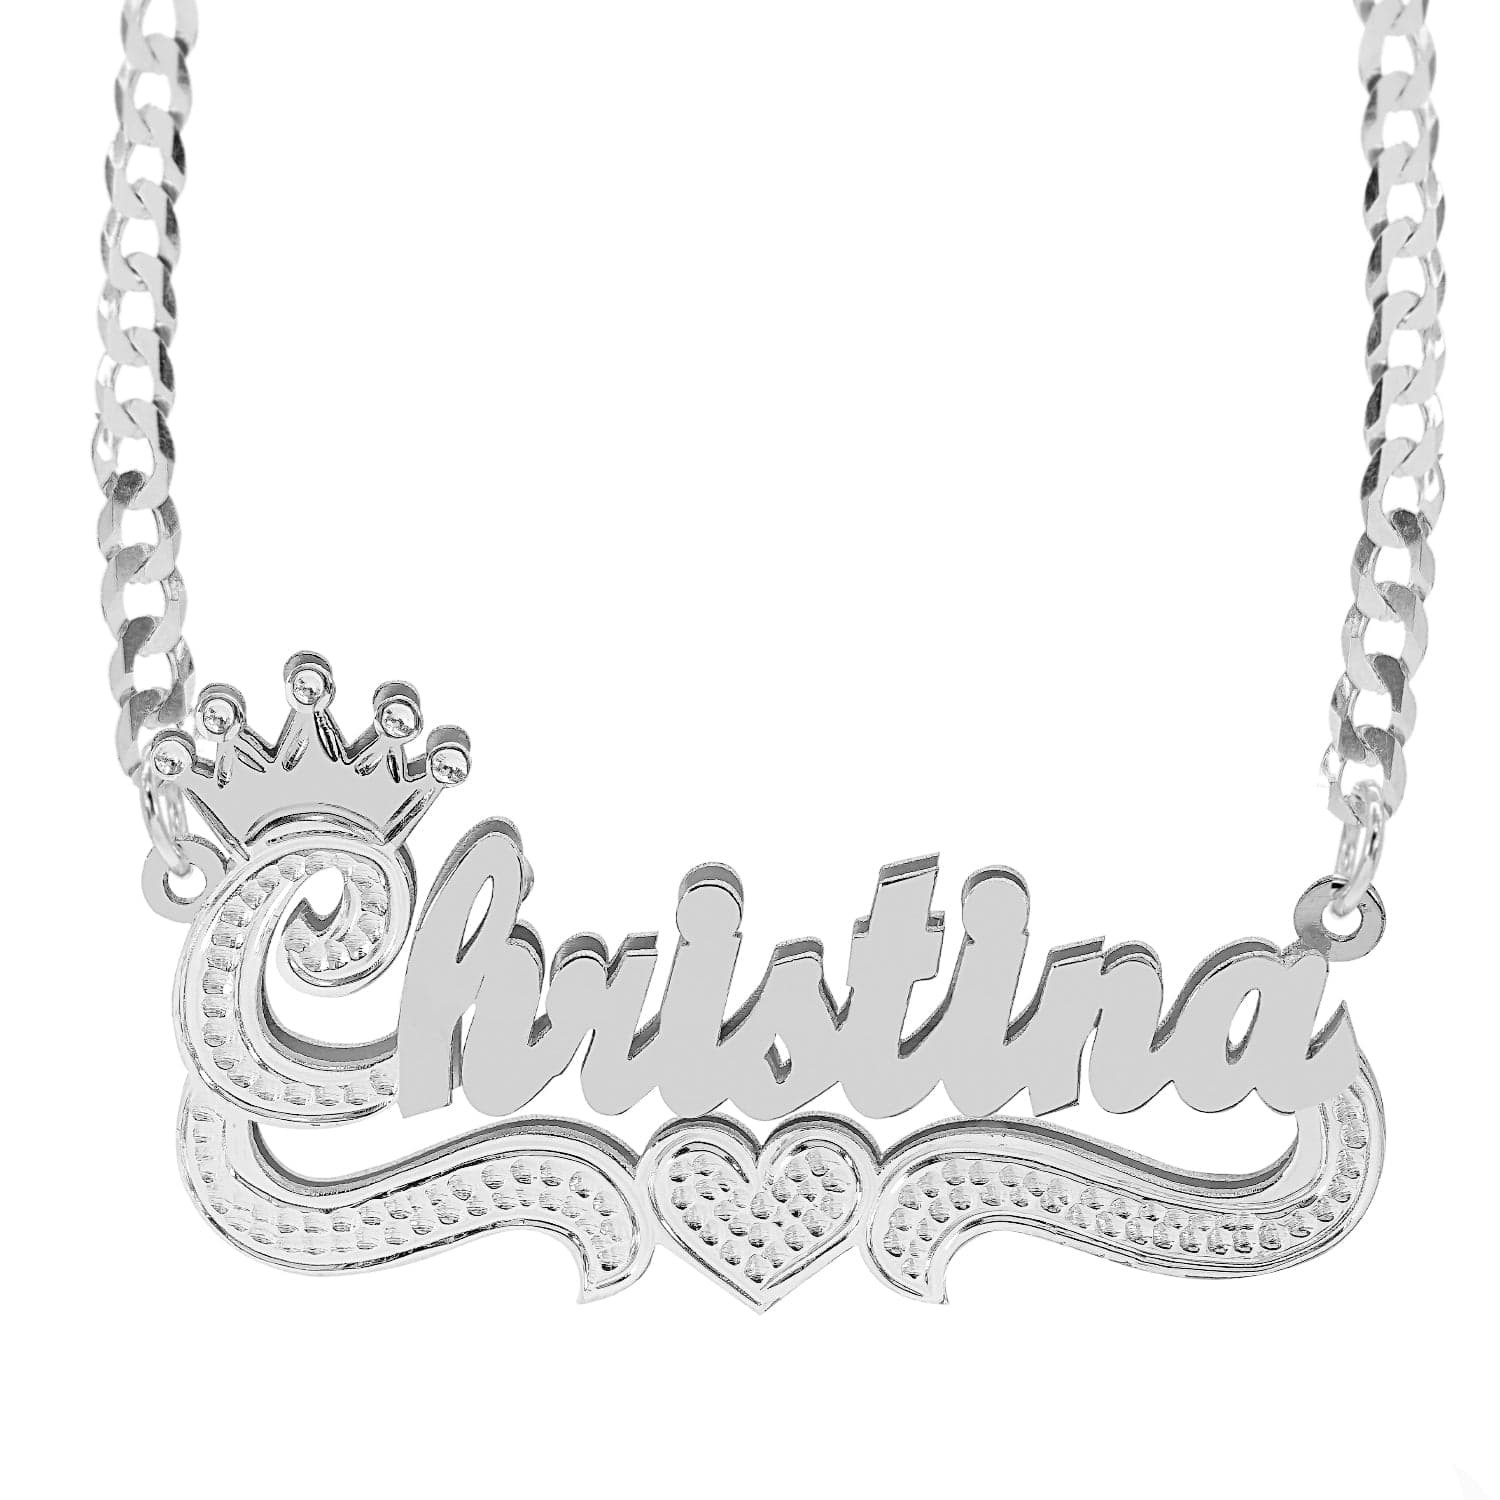 Two-Tone Sterling Silver / Cuban Chain Double Plated Name Necklace "Christina" with Cuban chain